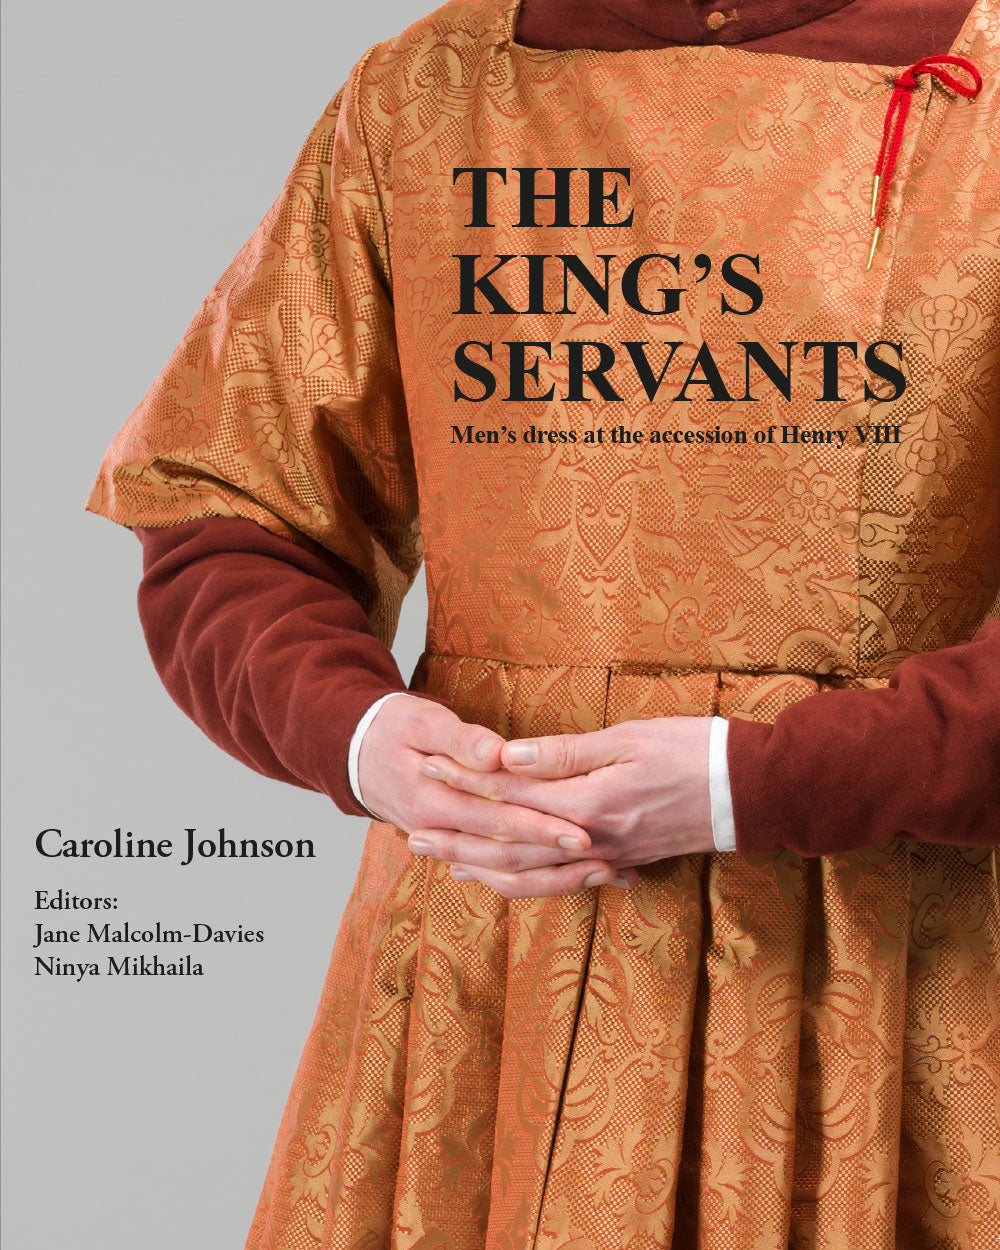 Combined book offer: The King's Servants & The Queen's Servants - REVISED 2ND EDITIONS